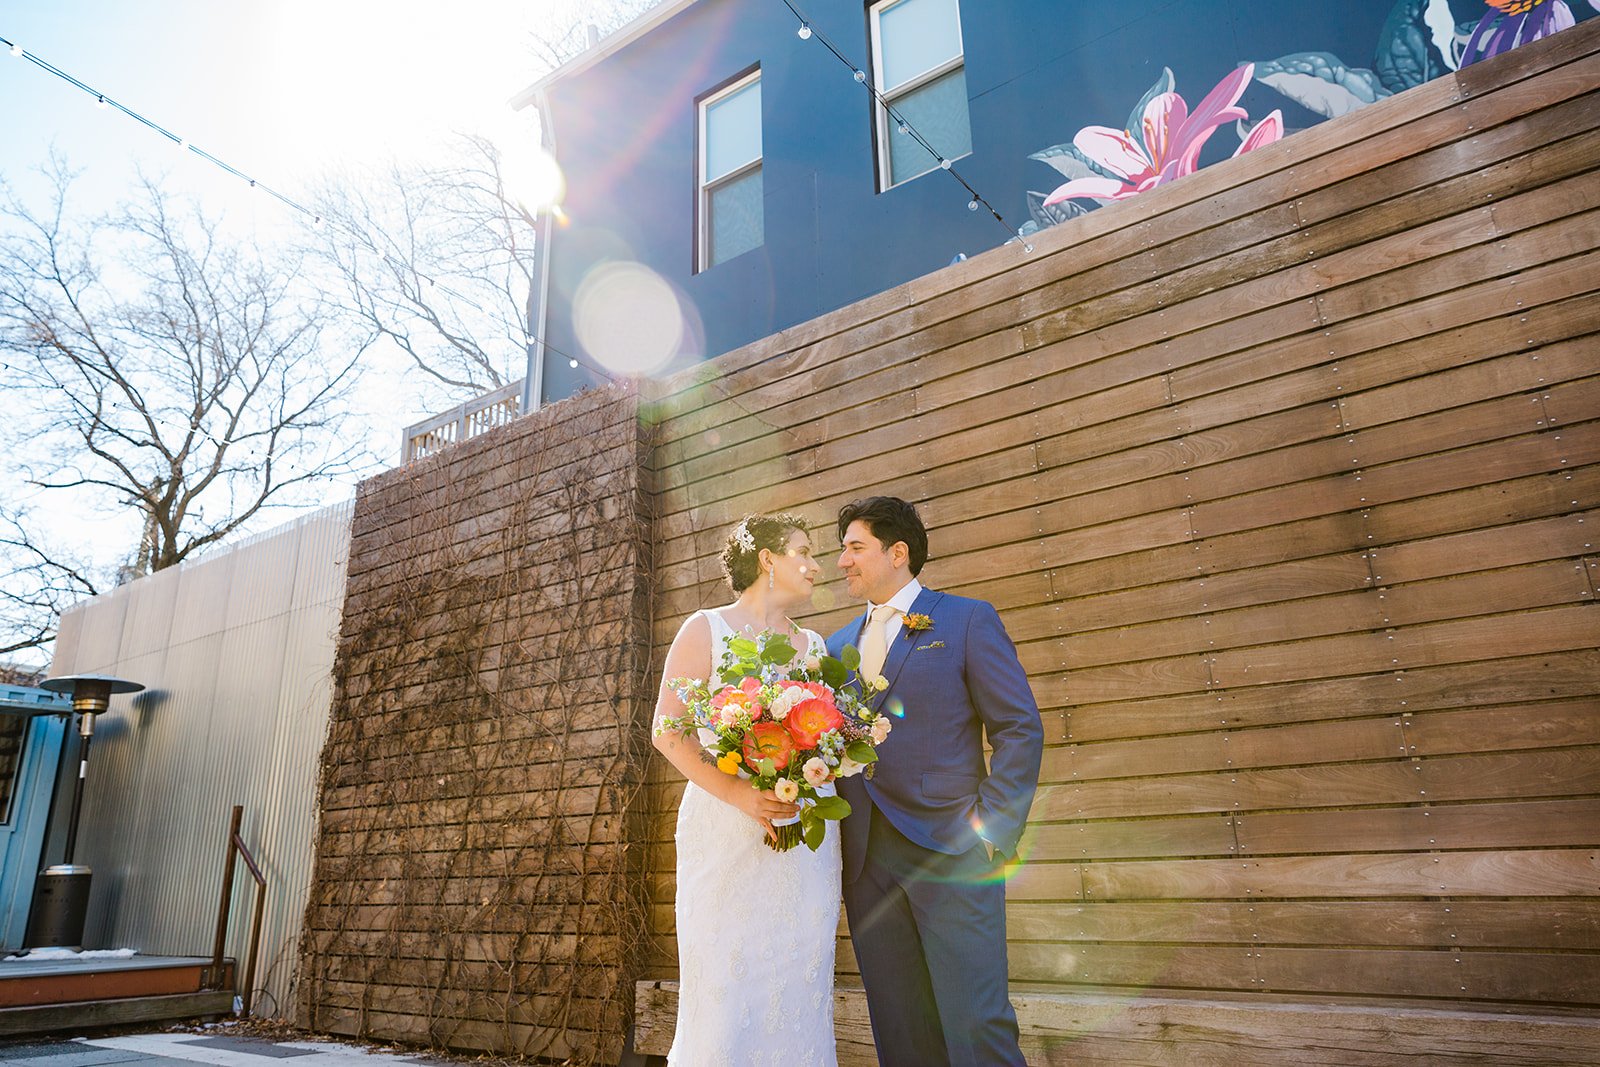  Portrait of nontraditional wedding couple looking at one another. Queer bride with short curly hair is in a white dress with a large colorful wedding bouquet and latino groom is in a blue suit with a yellow tie. They stand in front of a wooden panel